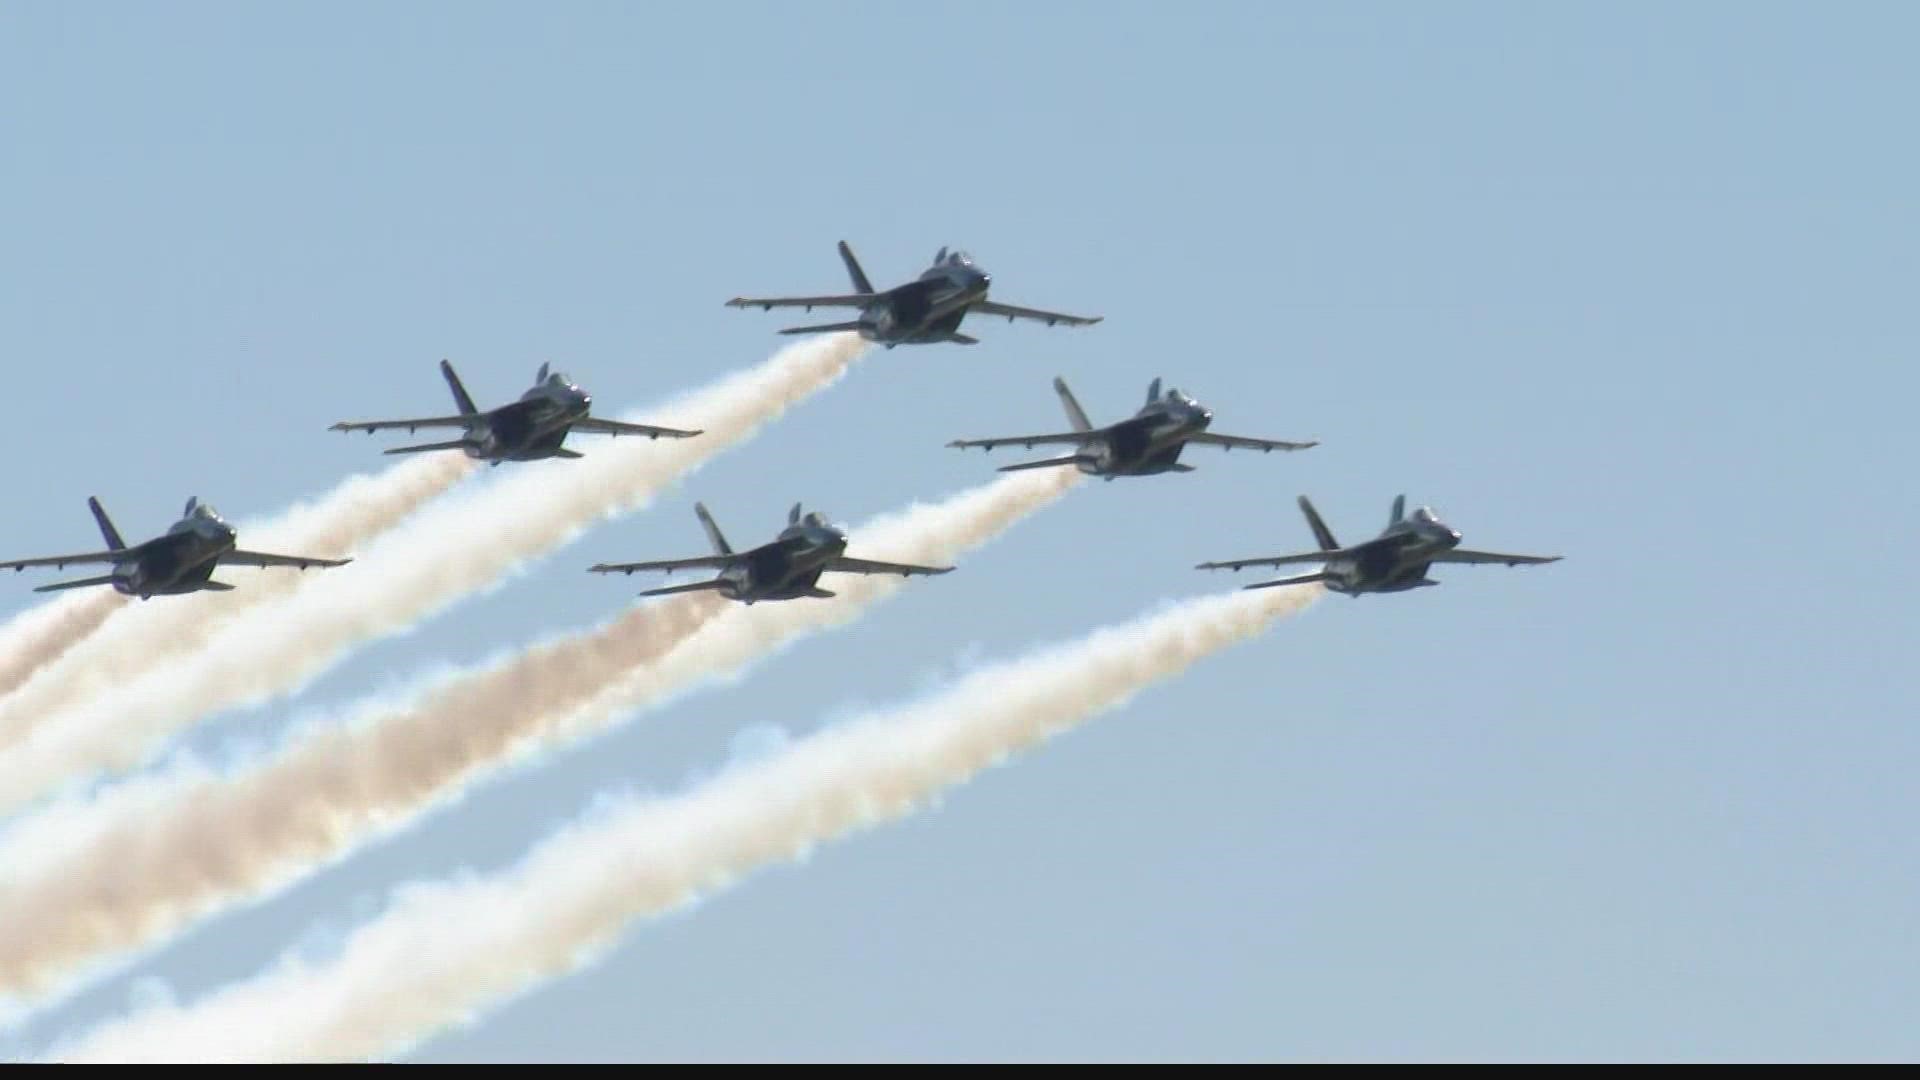 The U.S. Navy Blue Angels are coming back to St. Louis to put on a high-flying show this weekend.